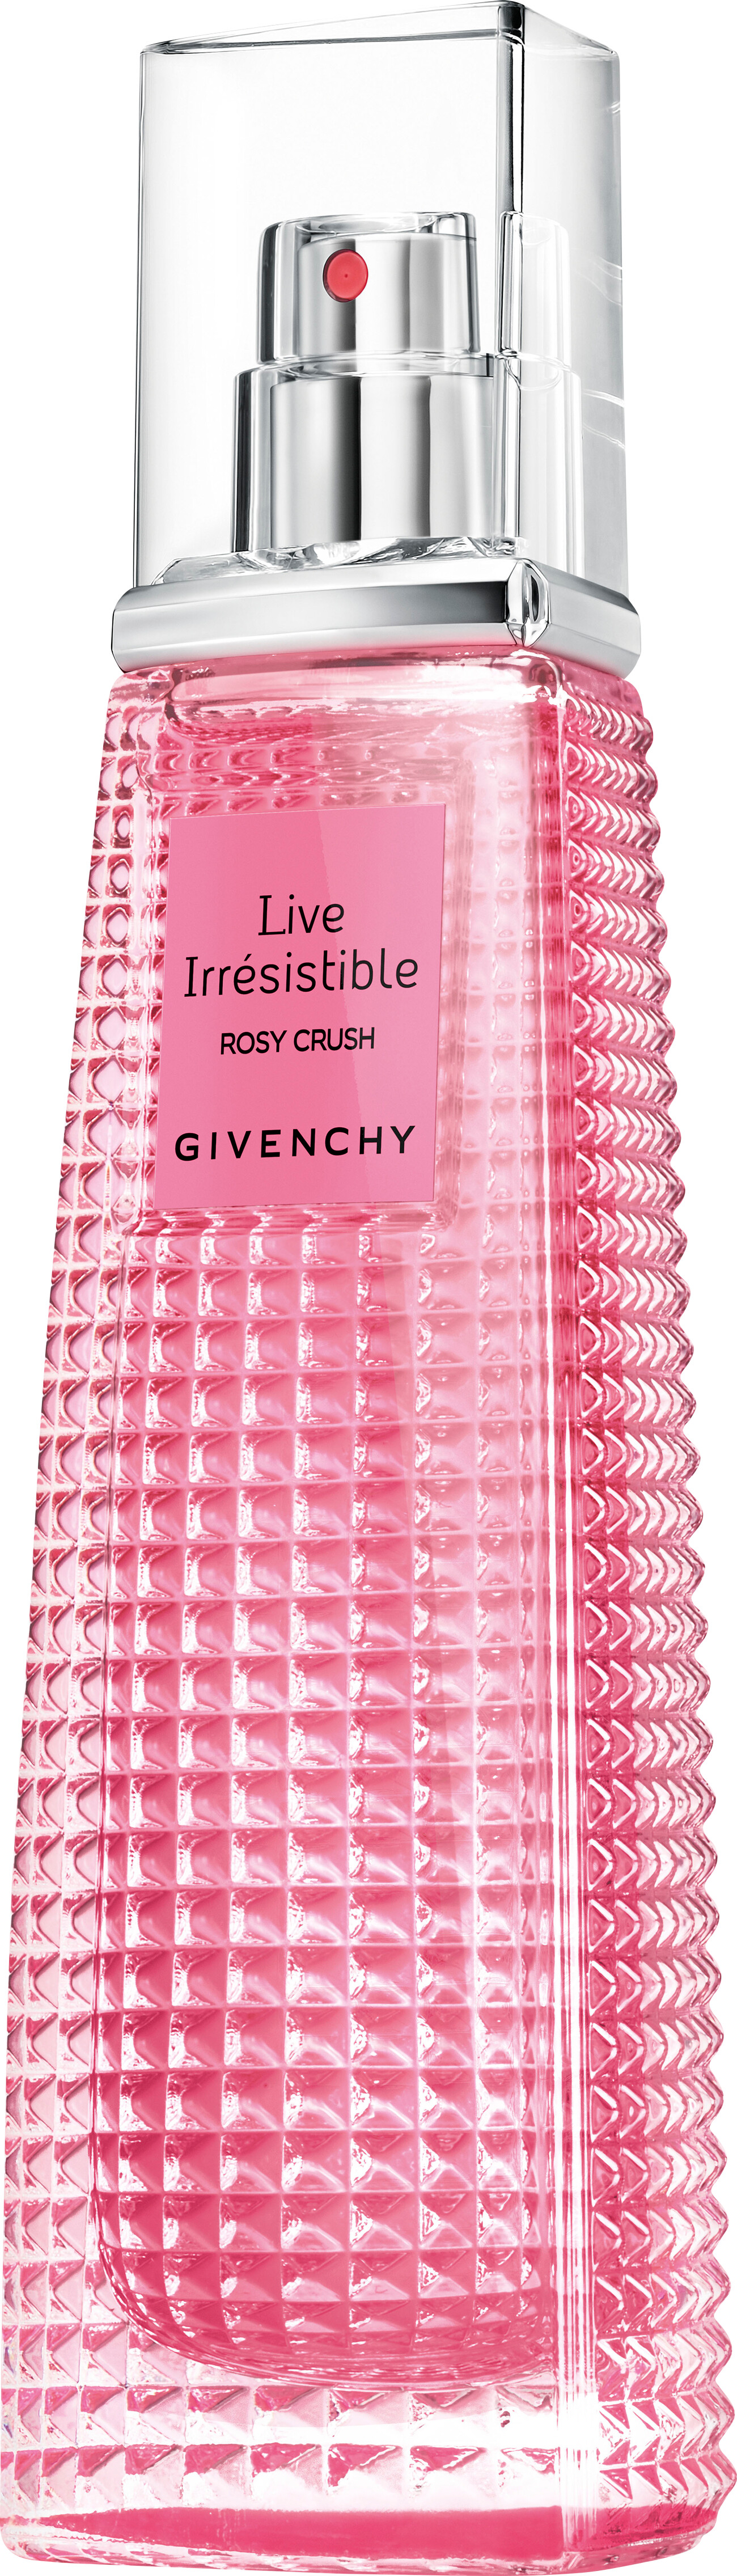 givenchy live irresistible rosy crush review